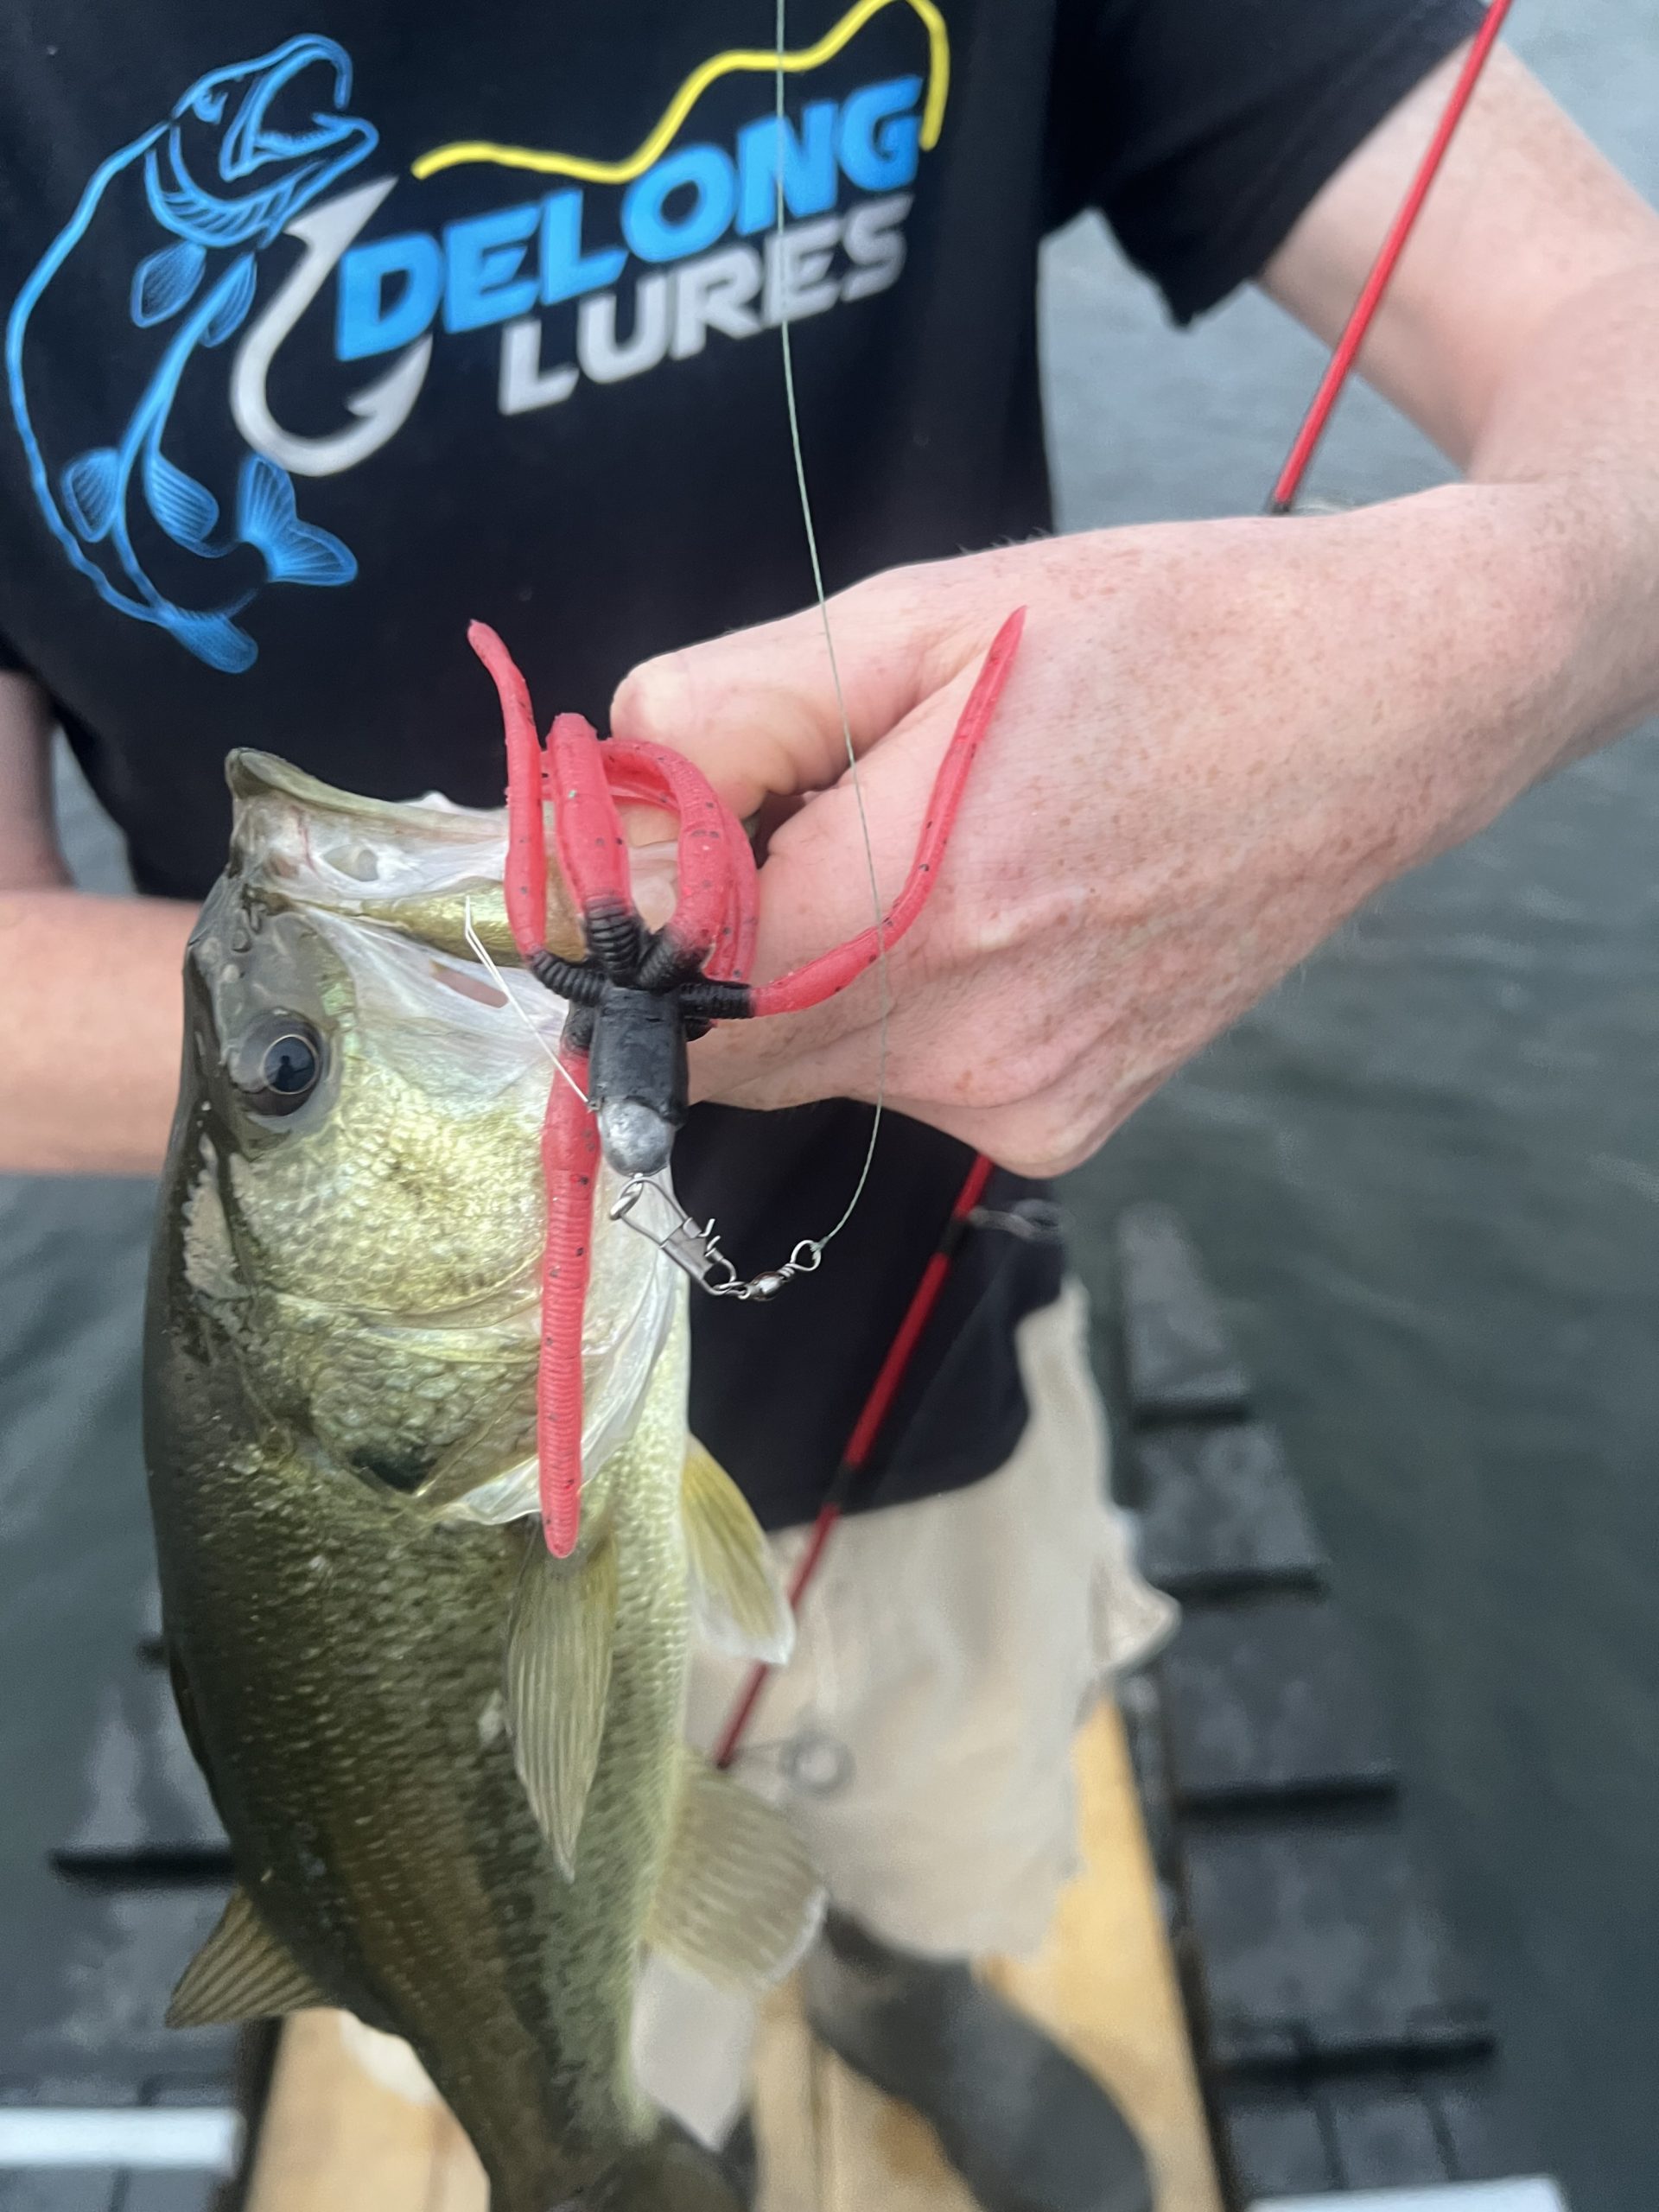  Delong Lures - Fishing Lures, 6 pre Rigged Weedless